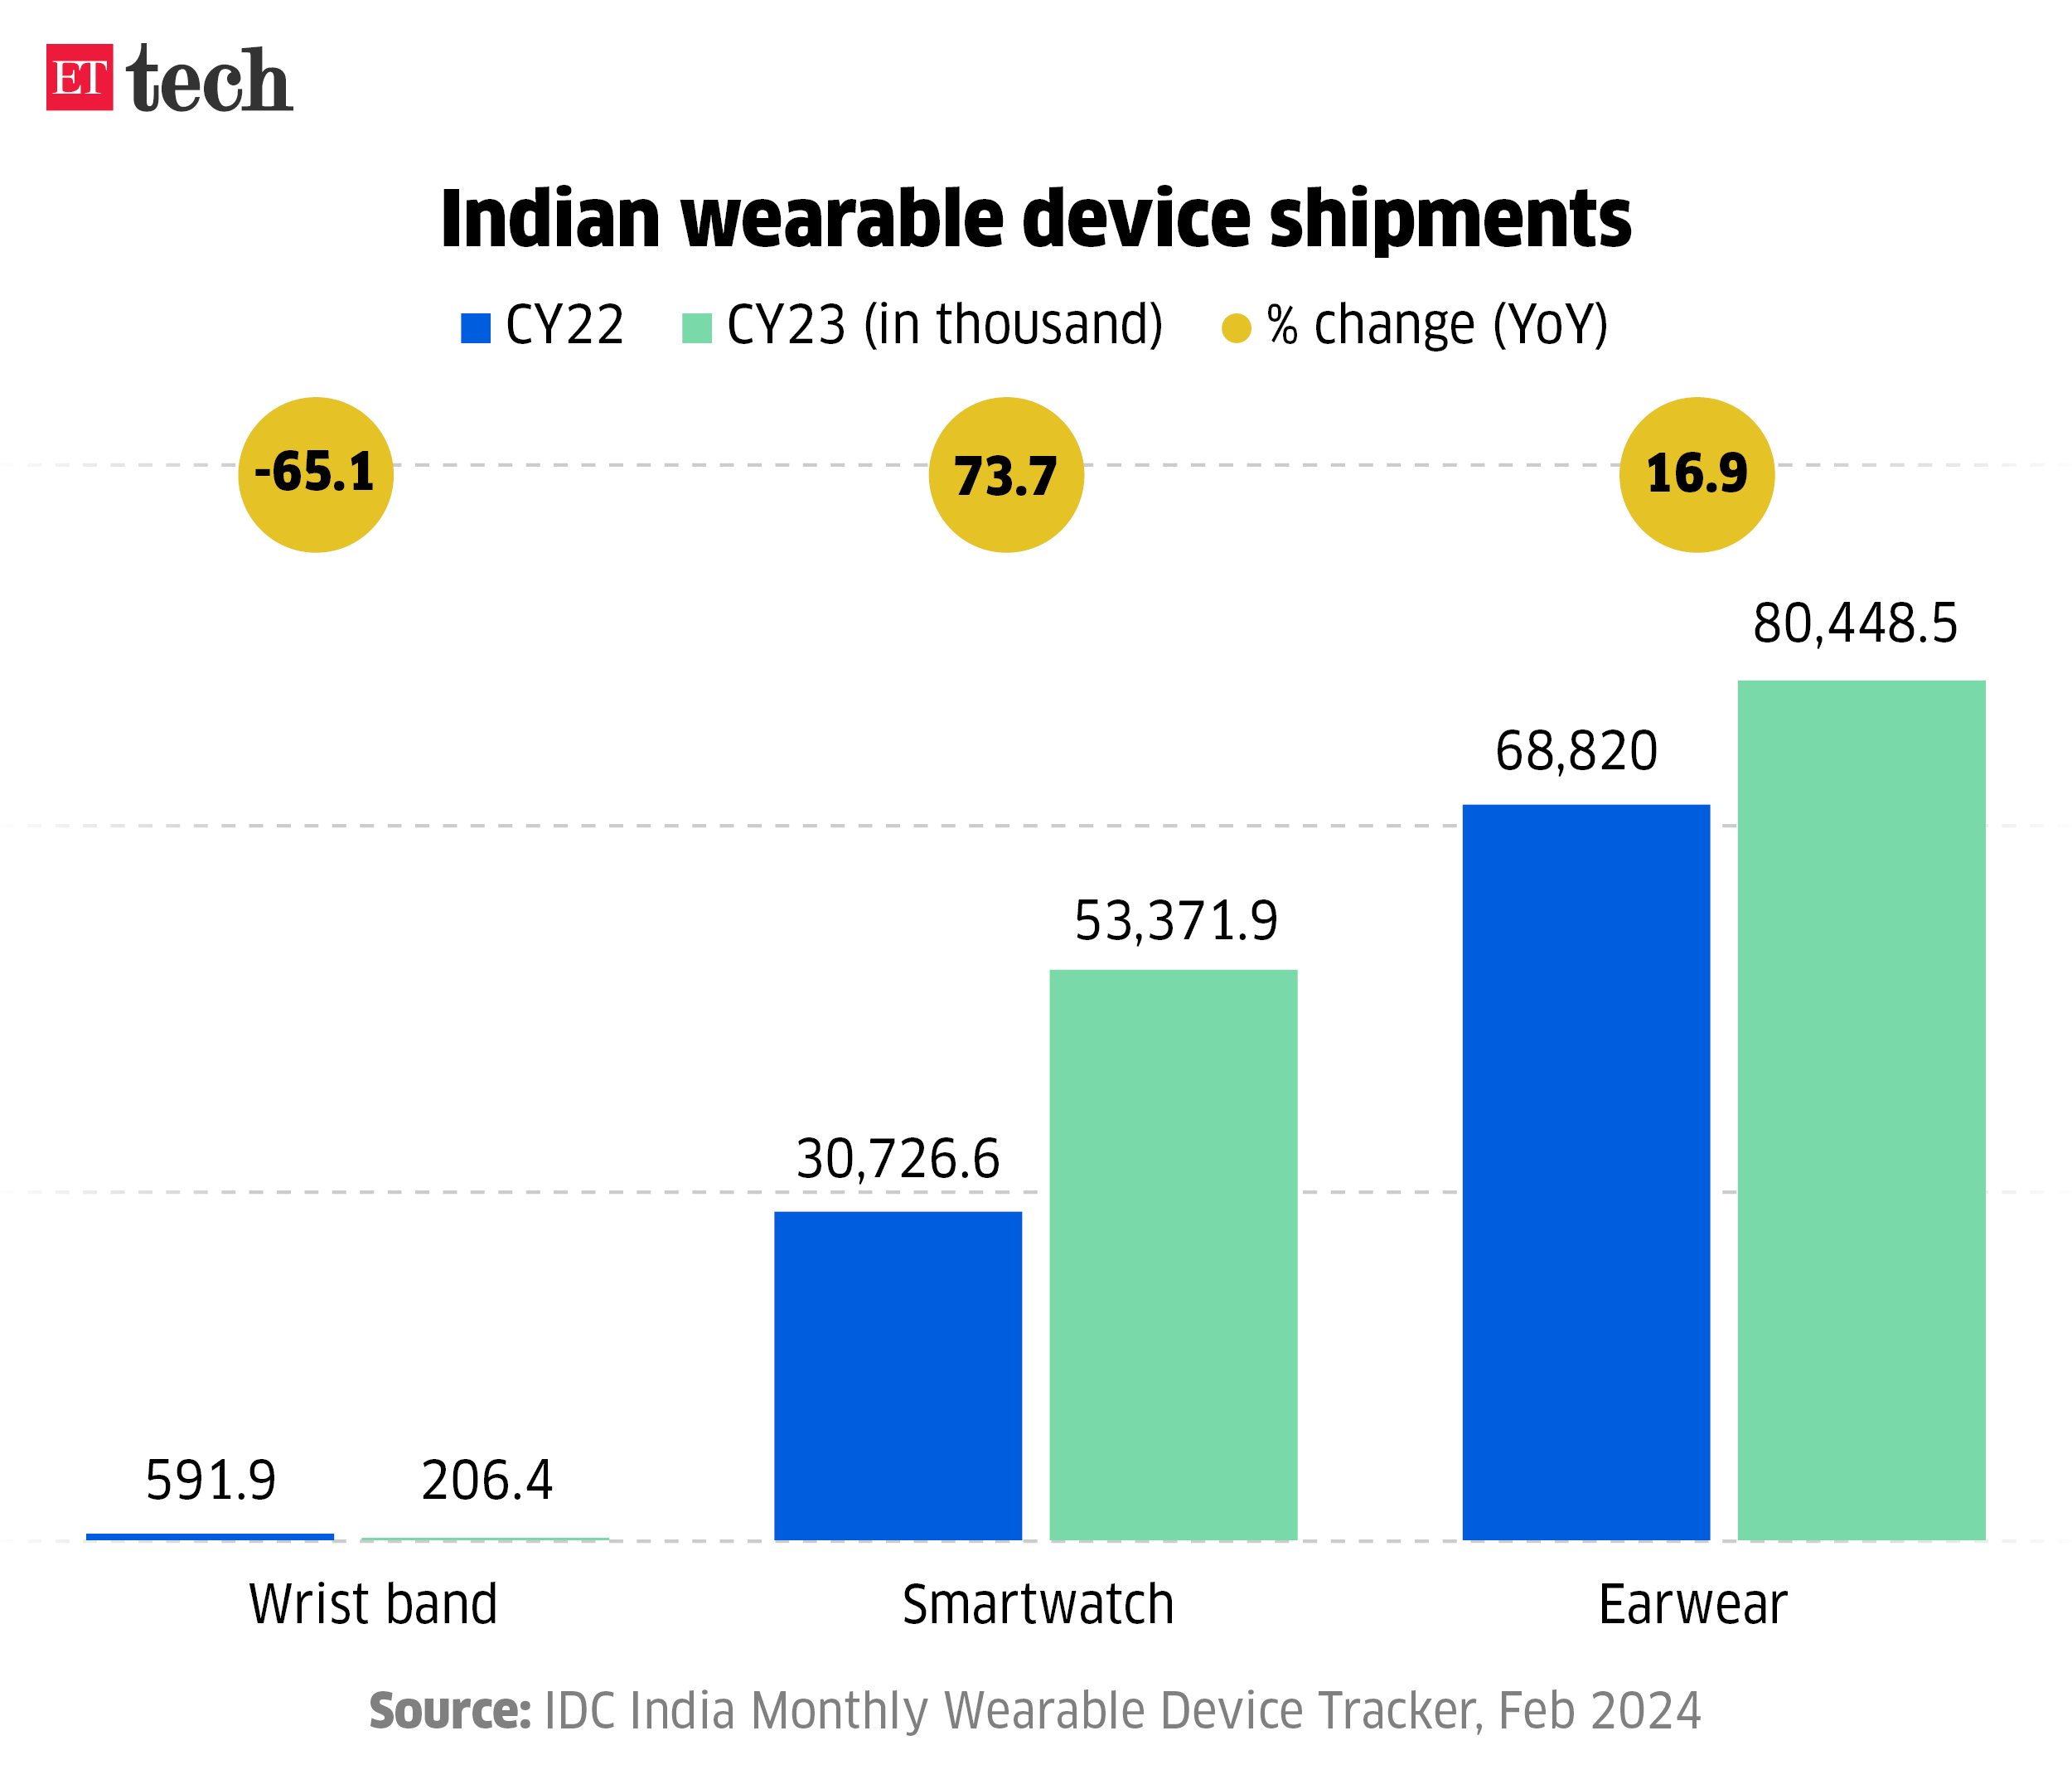 Indian wearable device shipments_Graphic_FEB, 2024_ETTECH